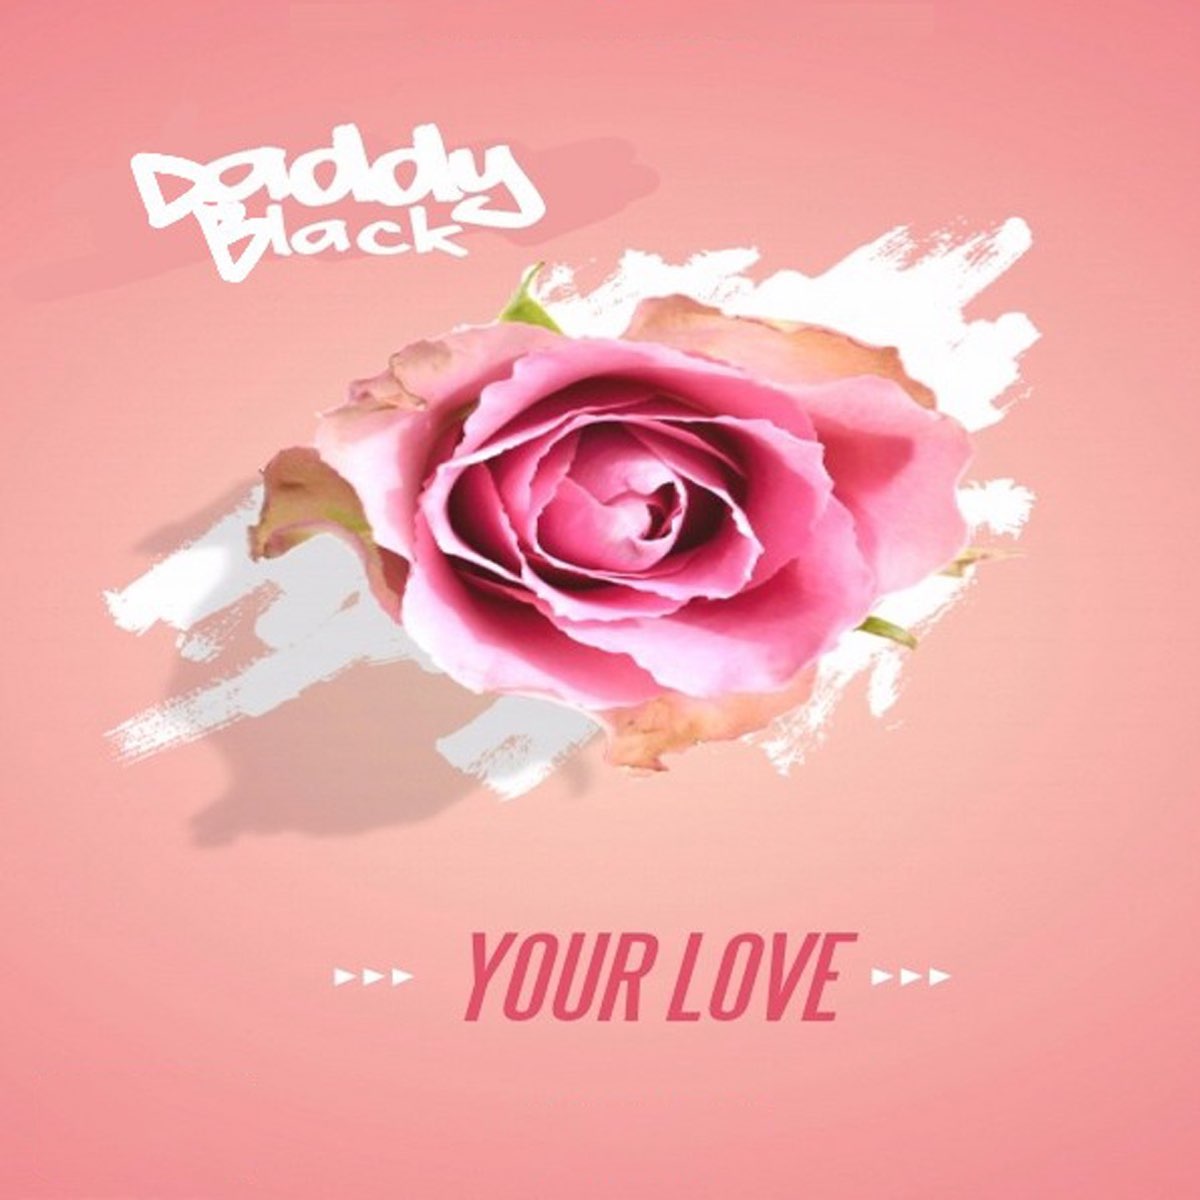 Песня your daddy. Your Love. This is Love Daddy песня. Your lover. Is this Love Daddy.